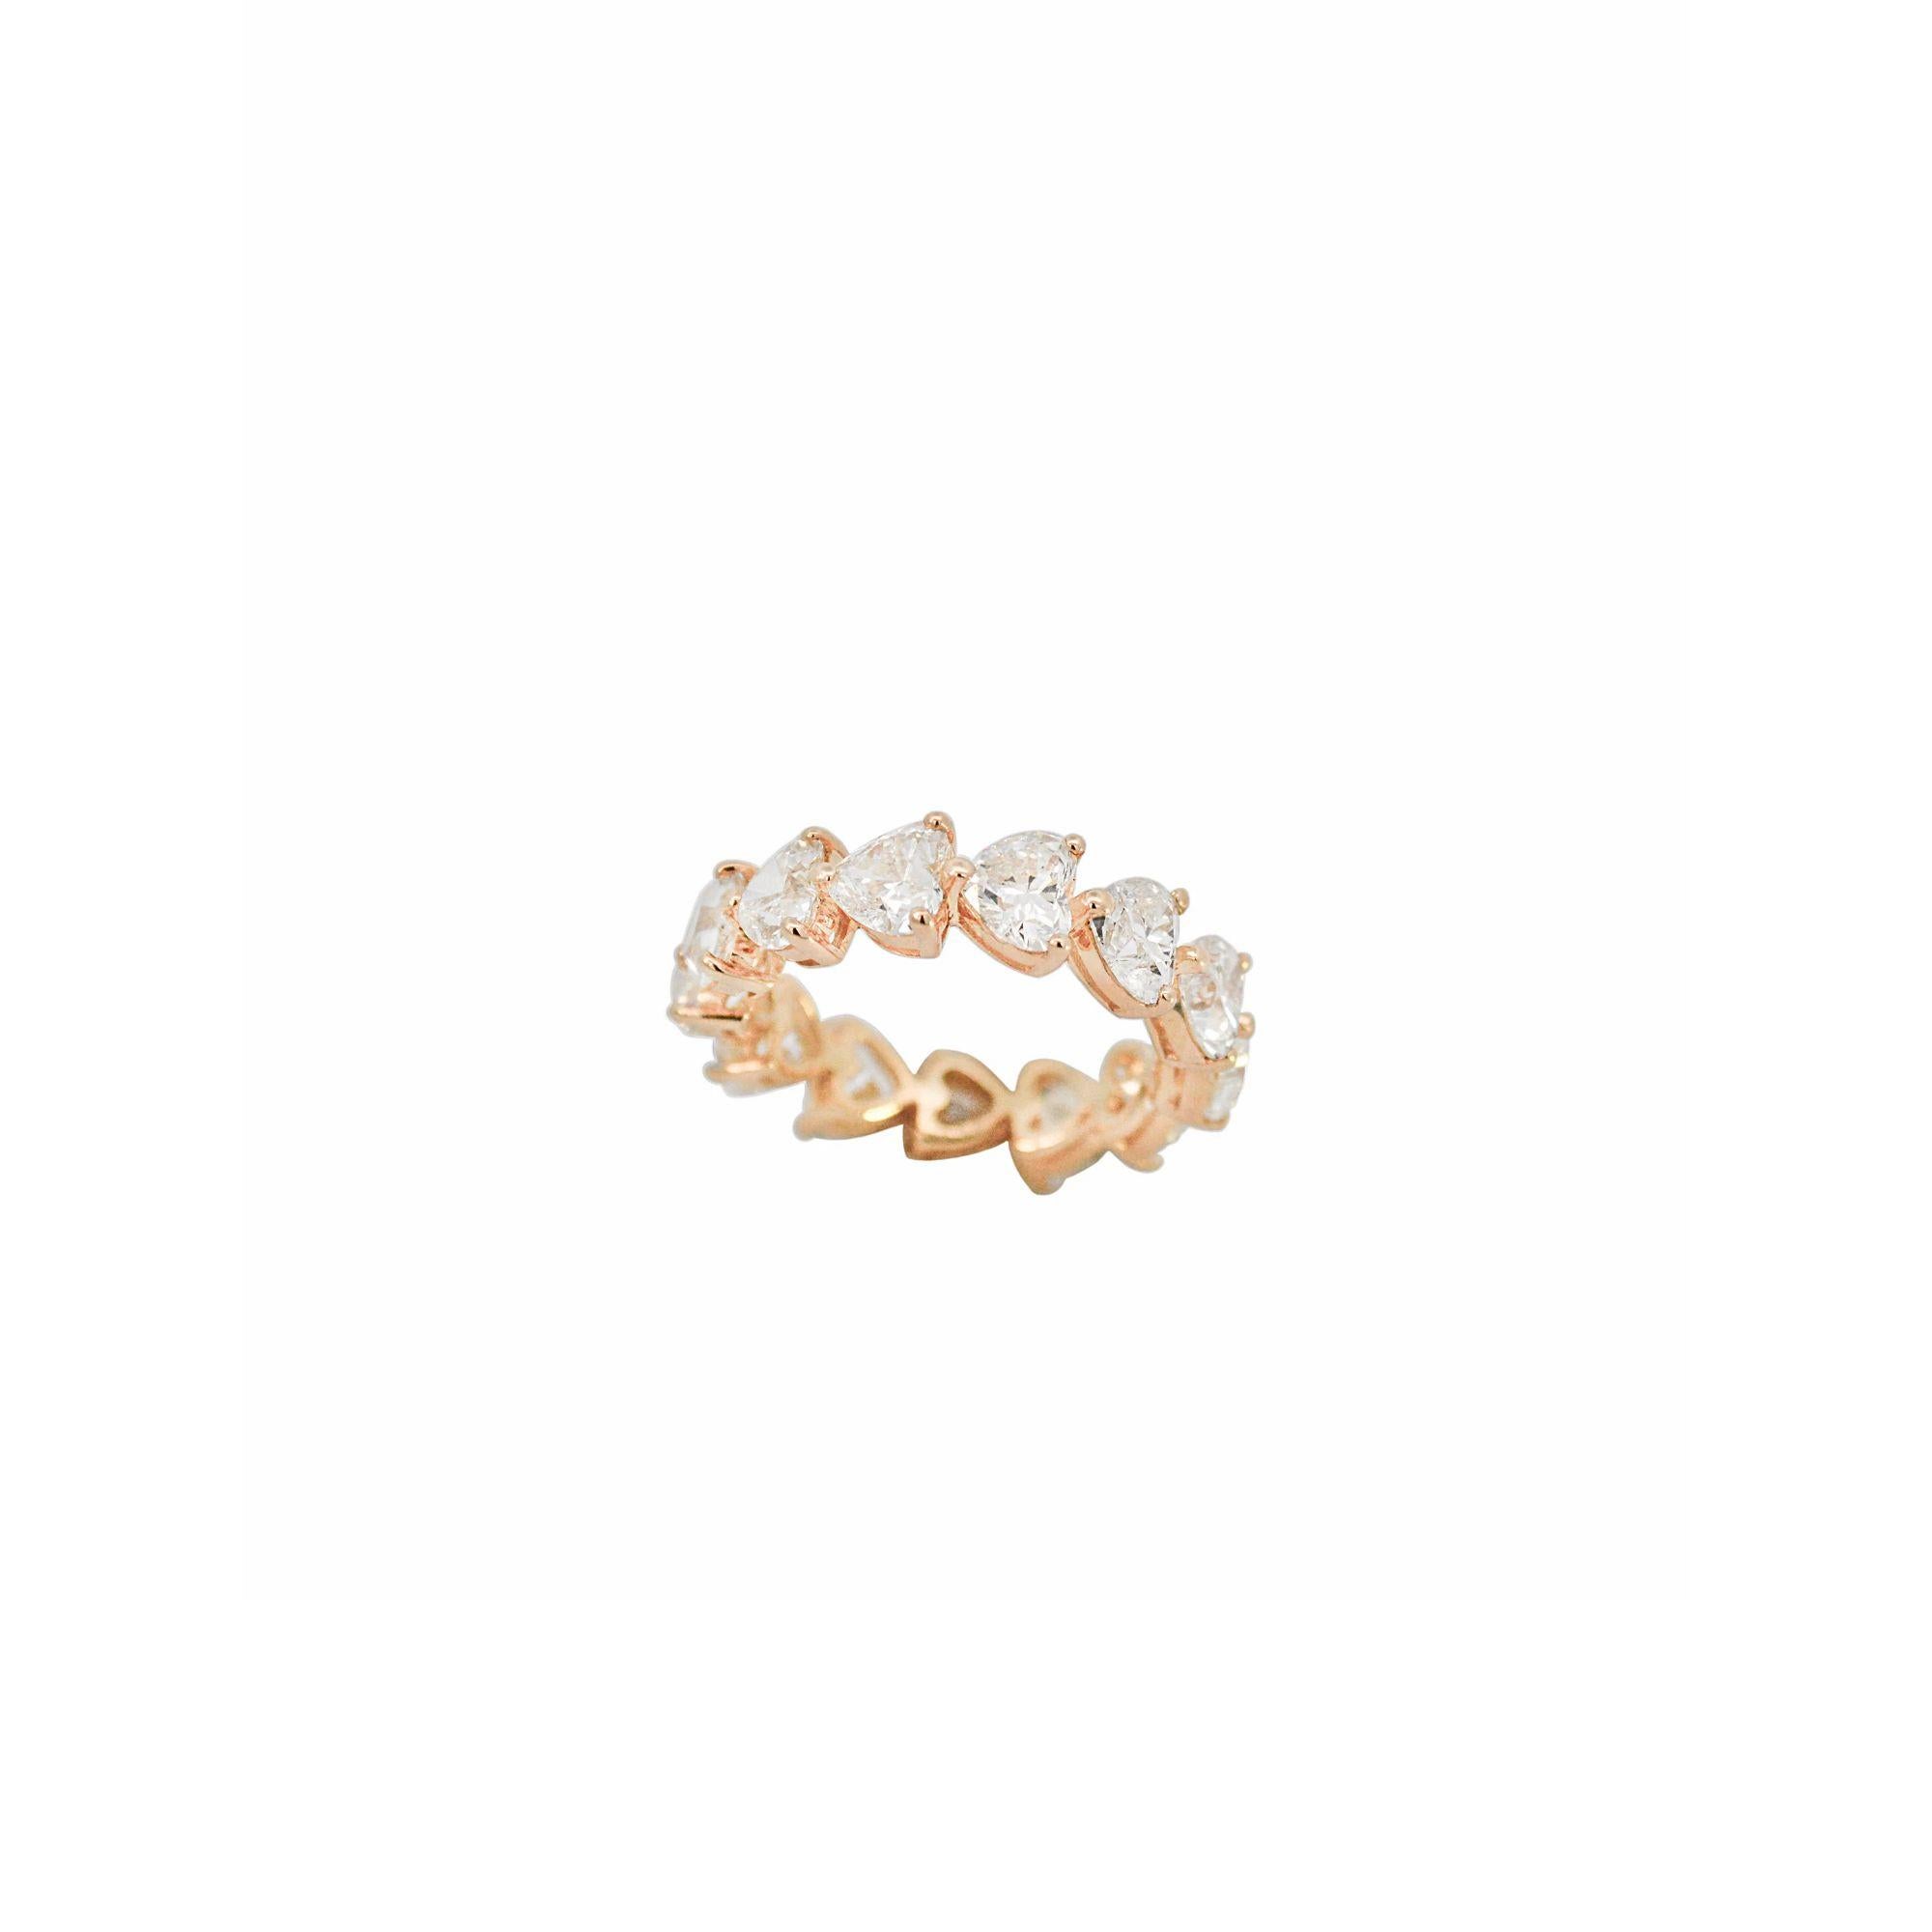 This sparkling eternity band will always be magical! Features 6.65ct heart-cut diamonds set in 18K yellow gold.

Additional information:
Metal: 18K Gold: 3.32gr
Stone: Diamonds: 6.65ct
Clarity: VS1 - SI1
Color: G - H
With natural inclusions,